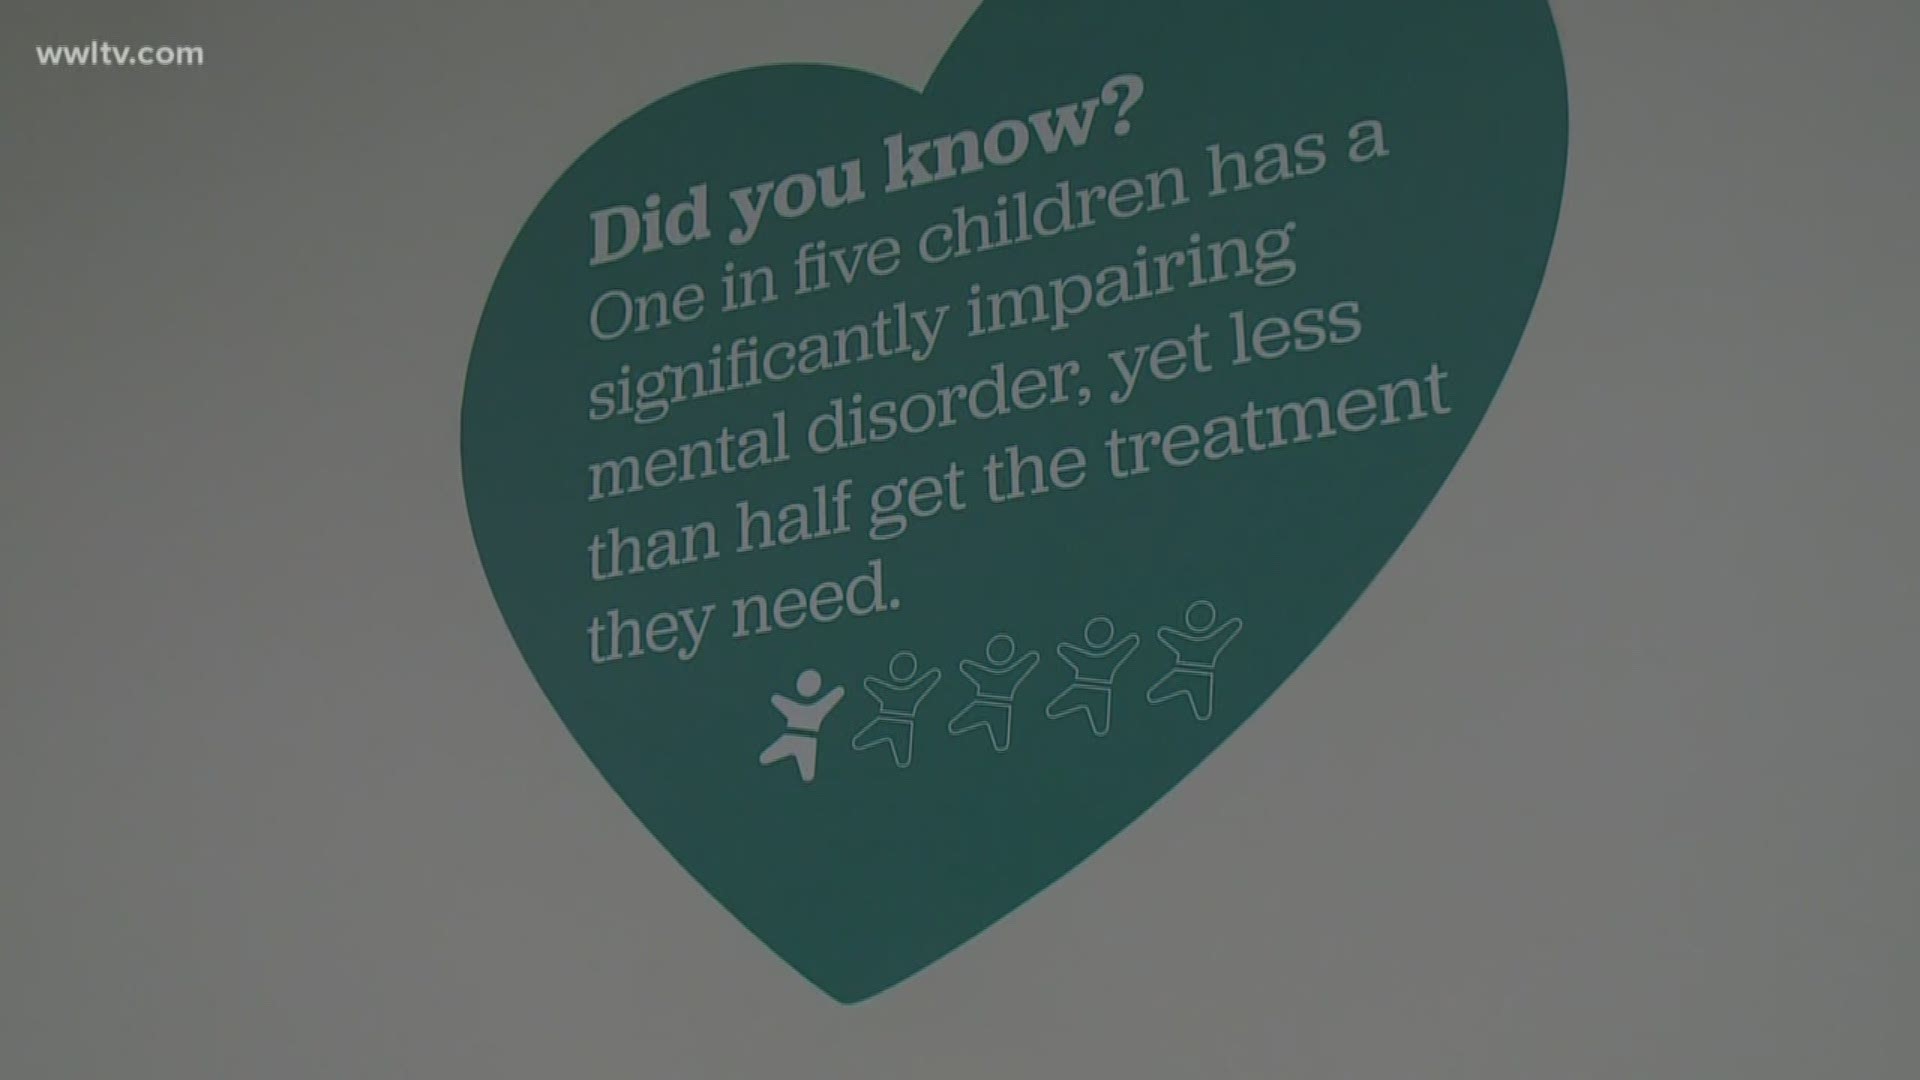 Soon, more children and teens will have access to a treatment that has been lacking in this area.